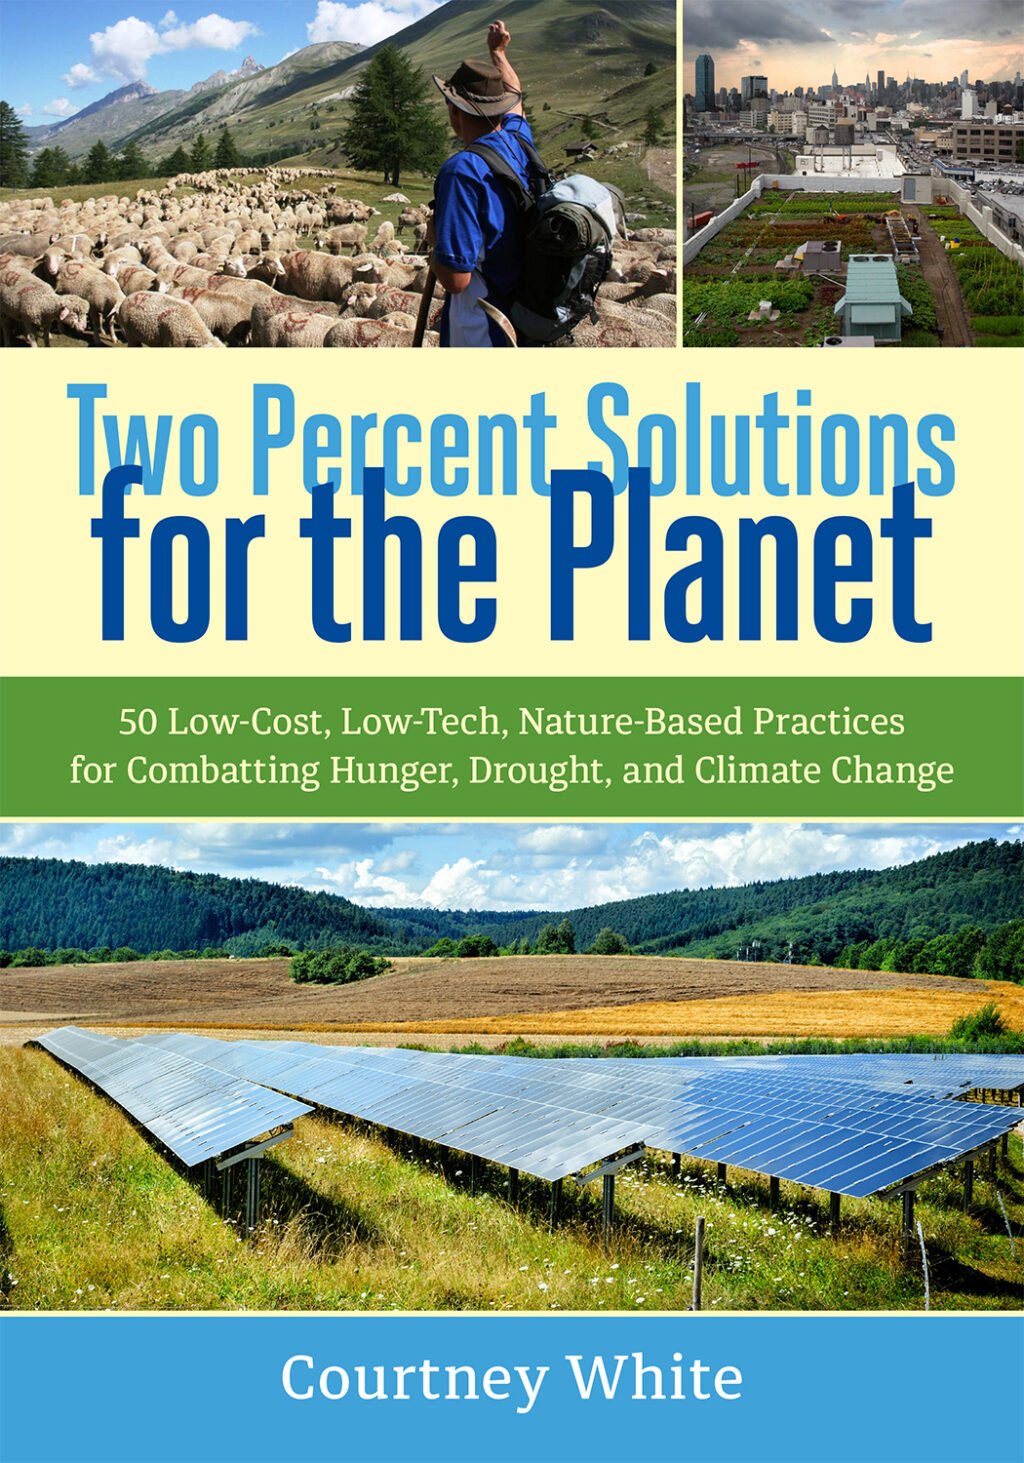 The Two Percent Solutions for the Planet cover